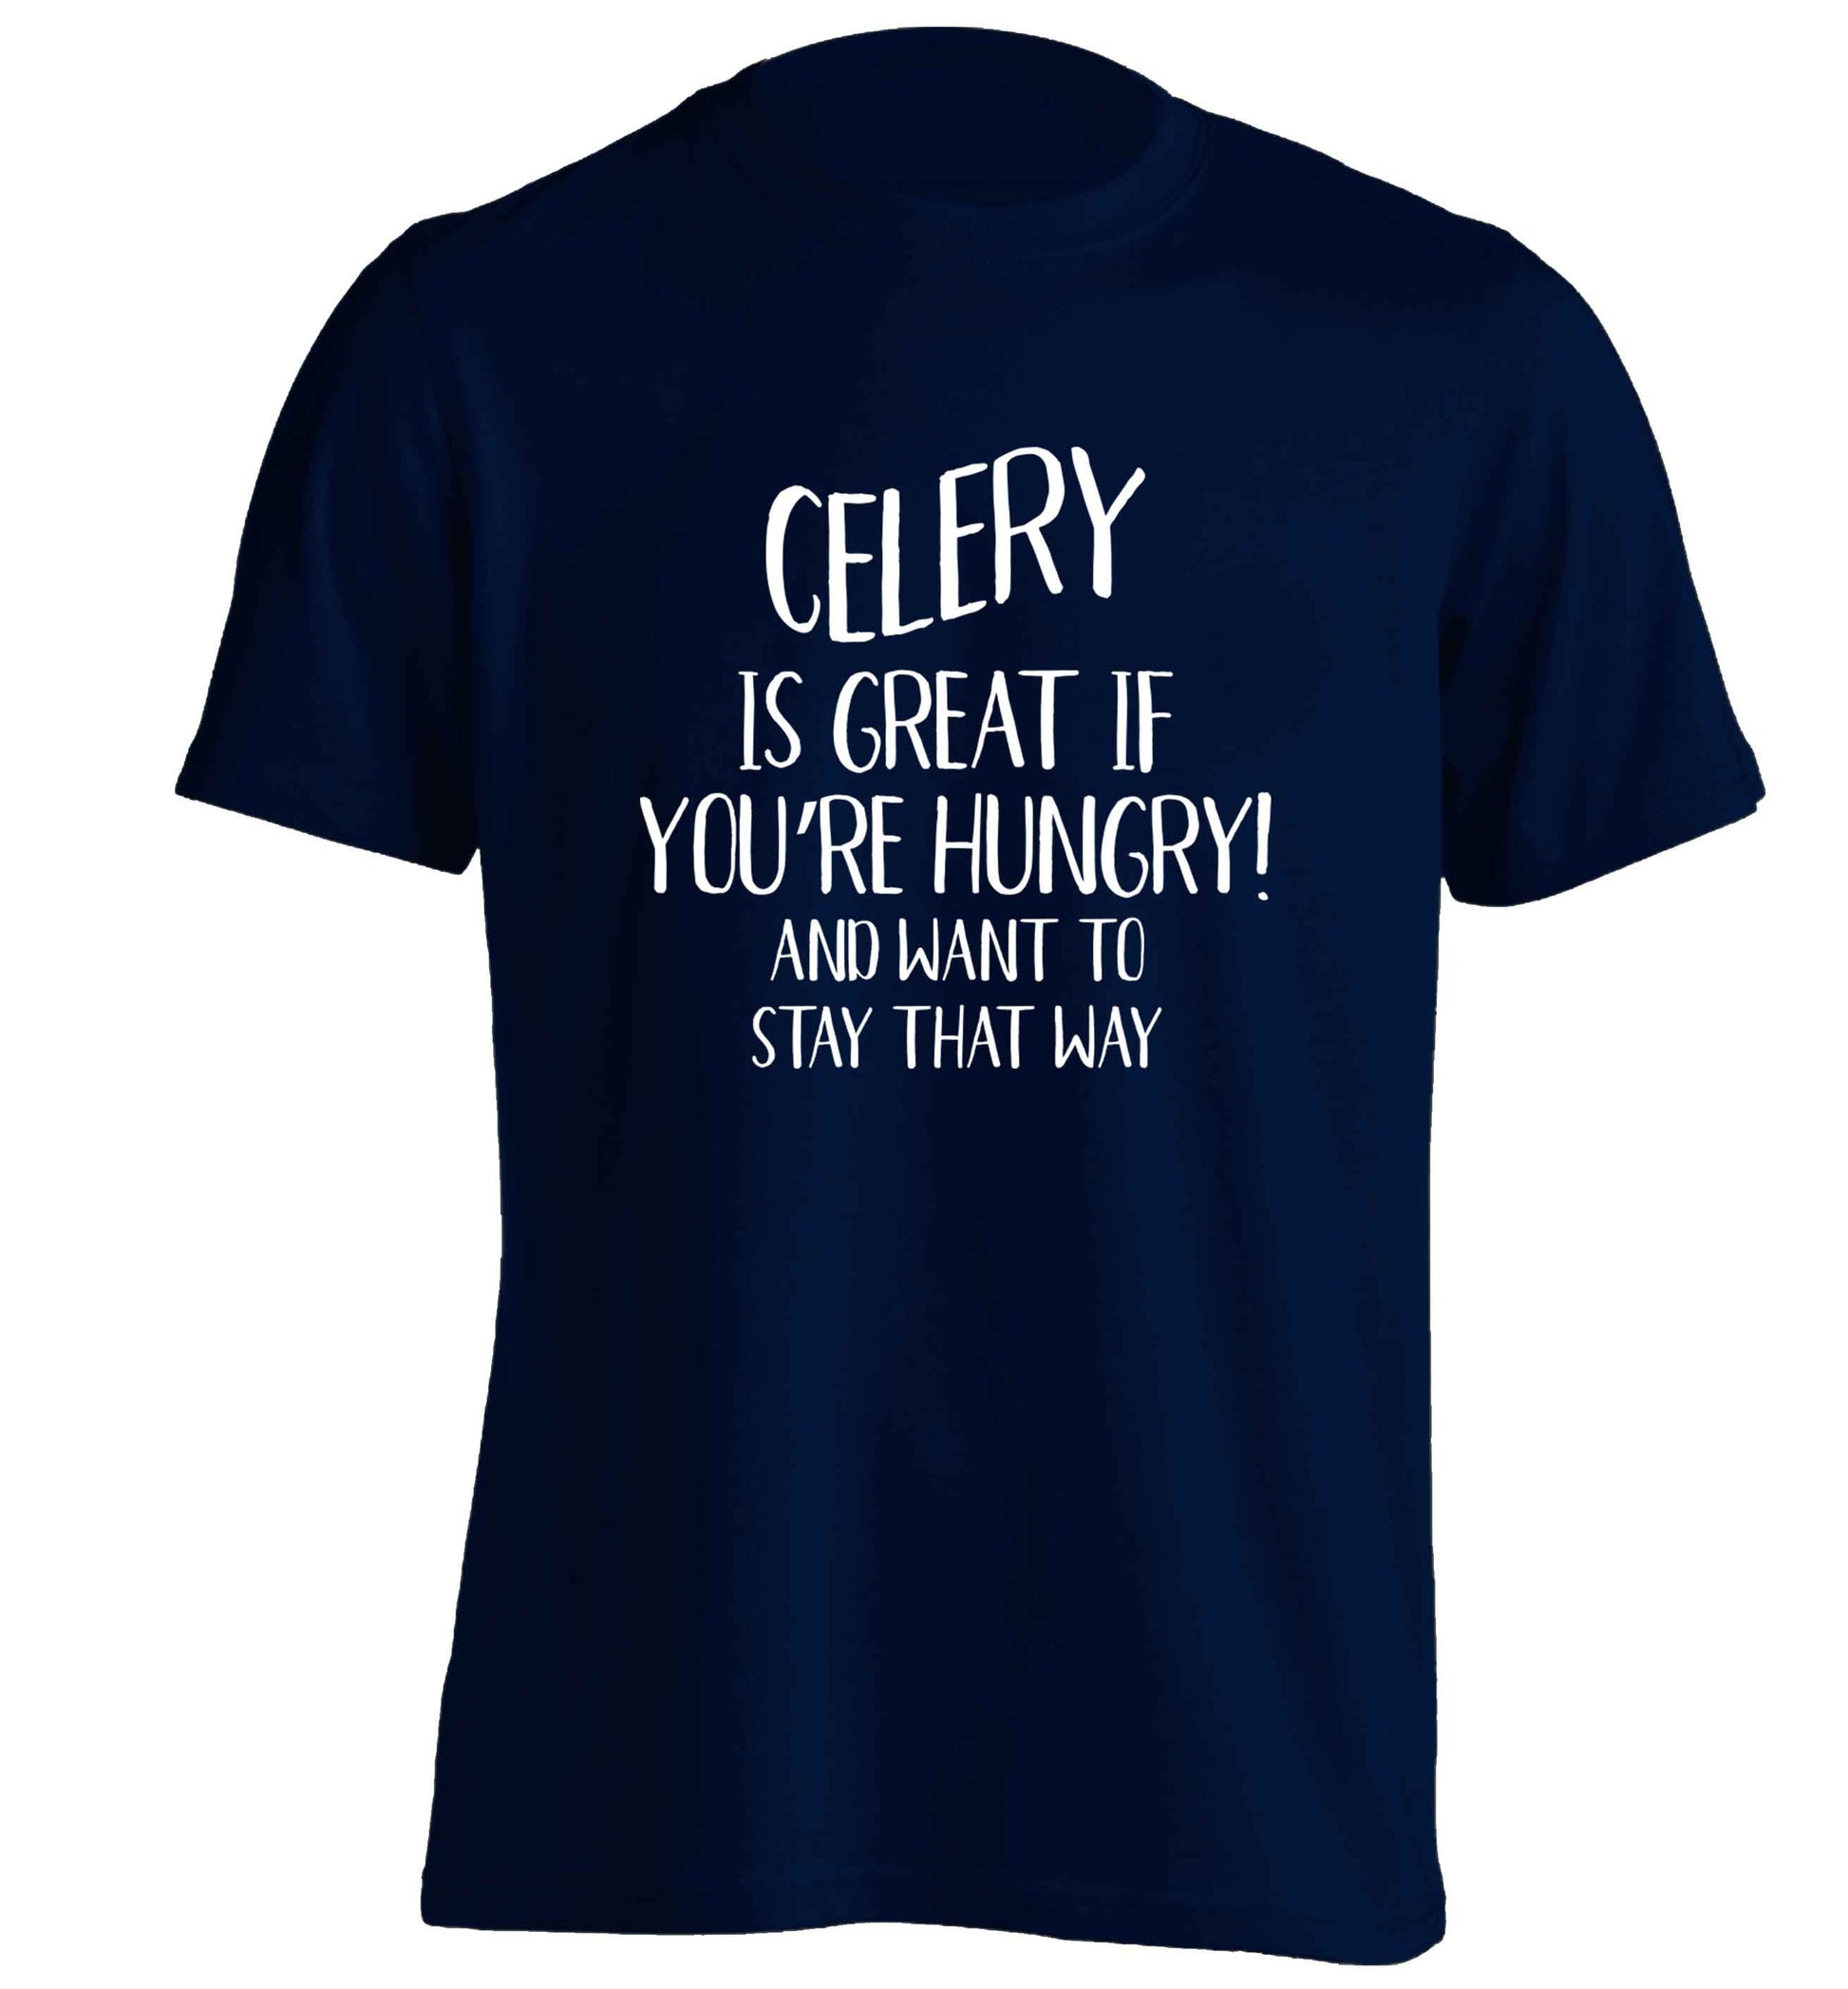 Cellery is great when you're hungry and want to stay that way adults unisex navy Tshirt 2XL